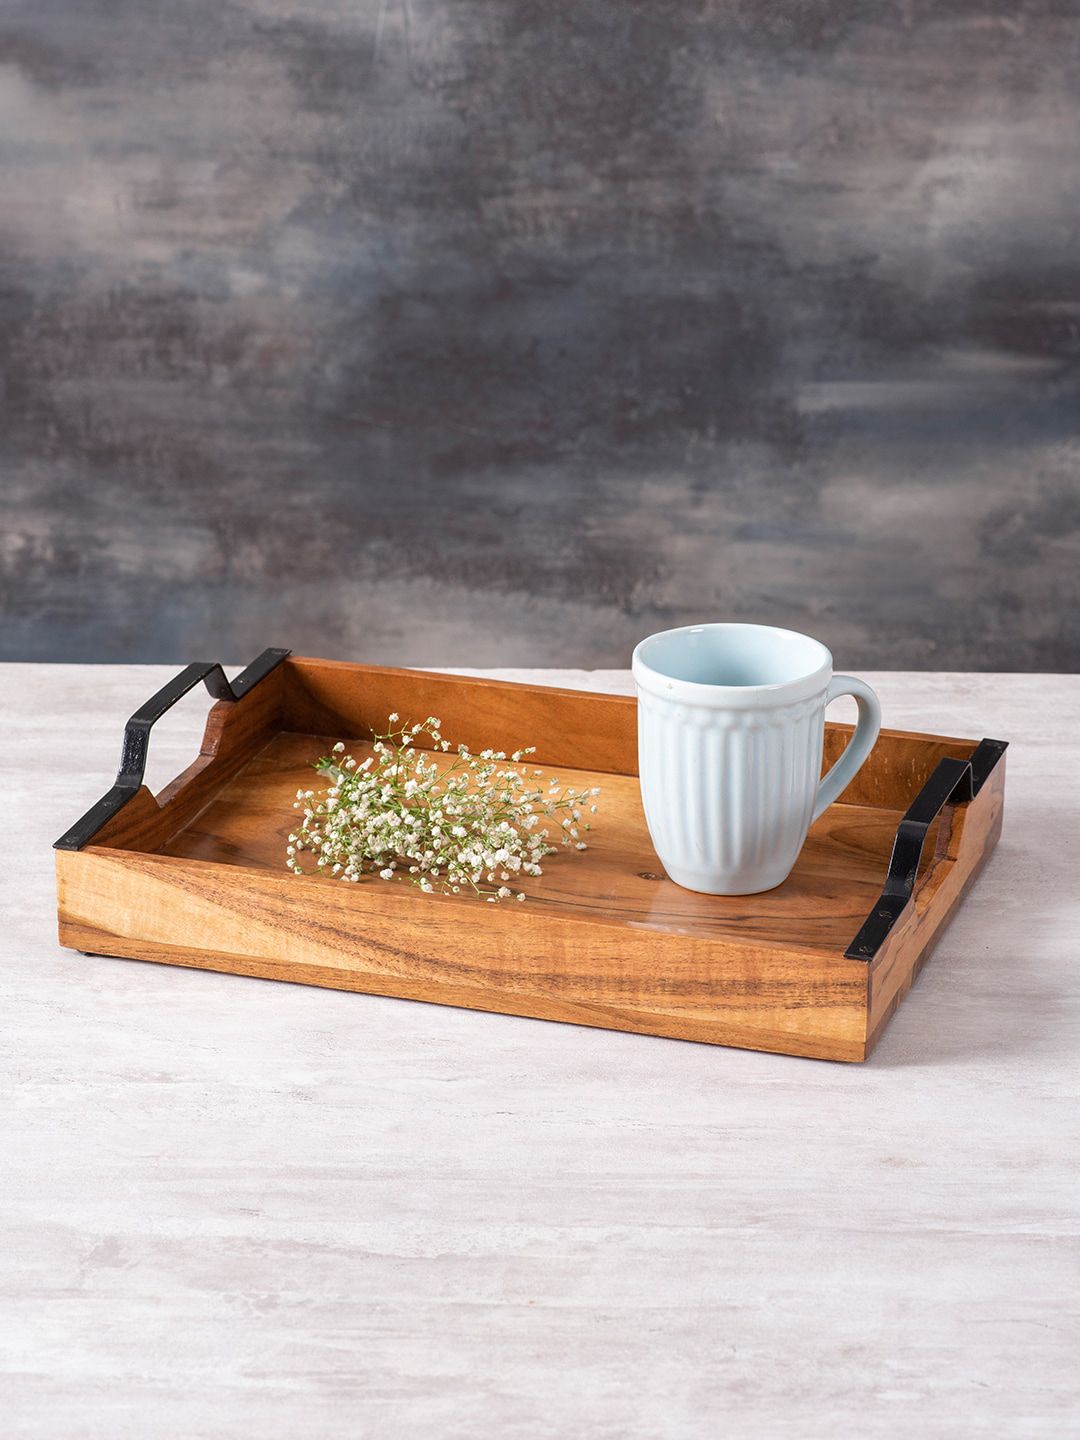 nestroots Brown & Black Wooden Serving Tray Price in India